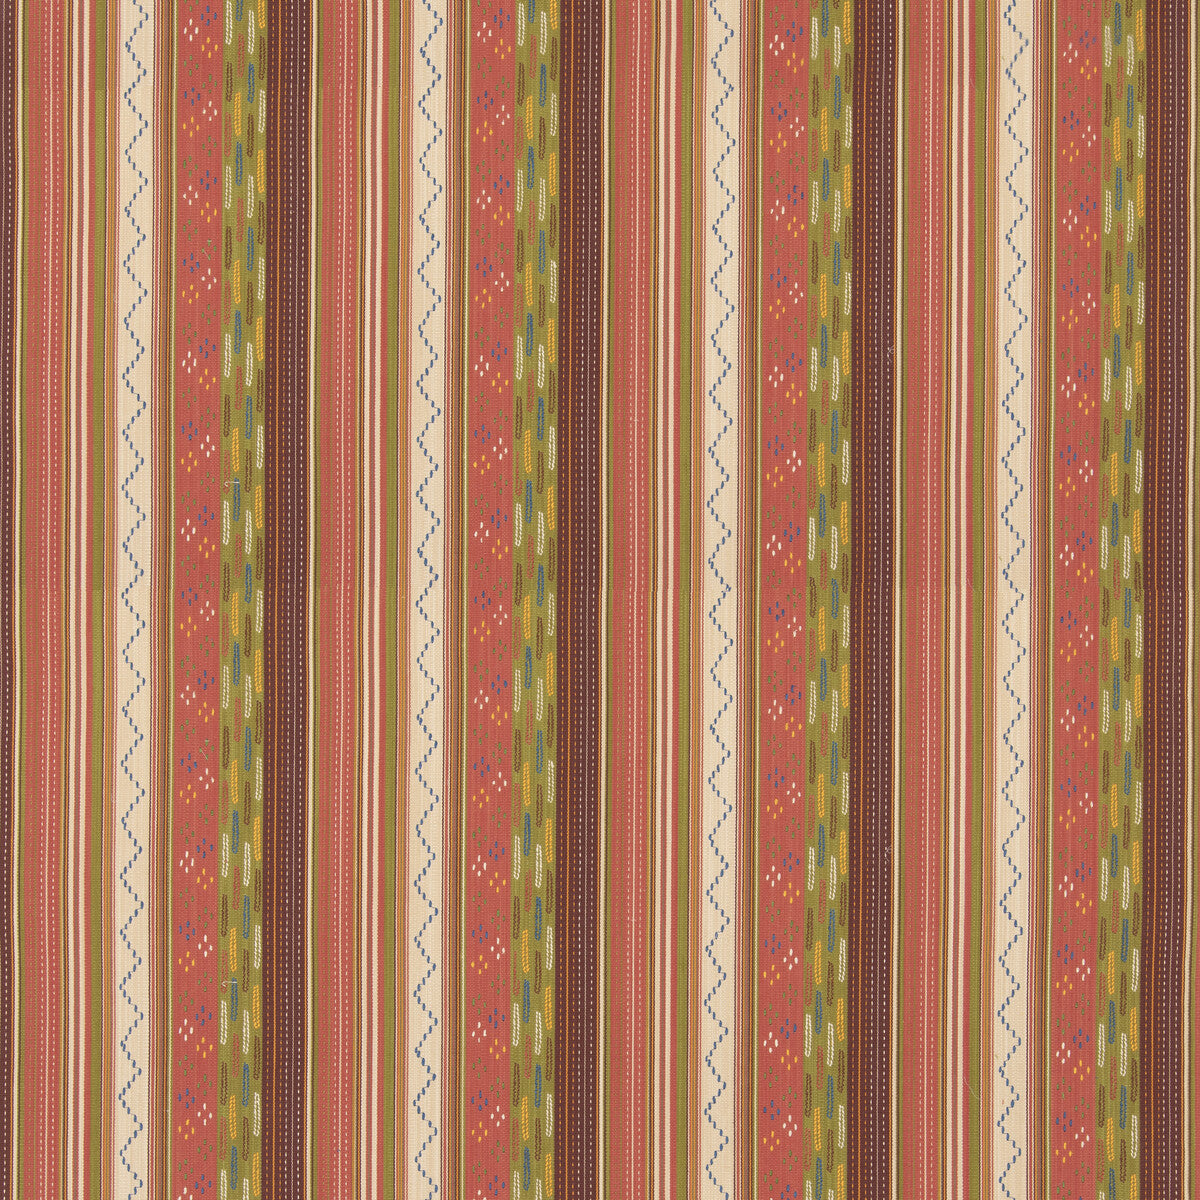 Runaway fabric in coral/green color - pattern BF11060.3.0 - by G P &amp; J Baker in the X Kit Kemp Stripes collection